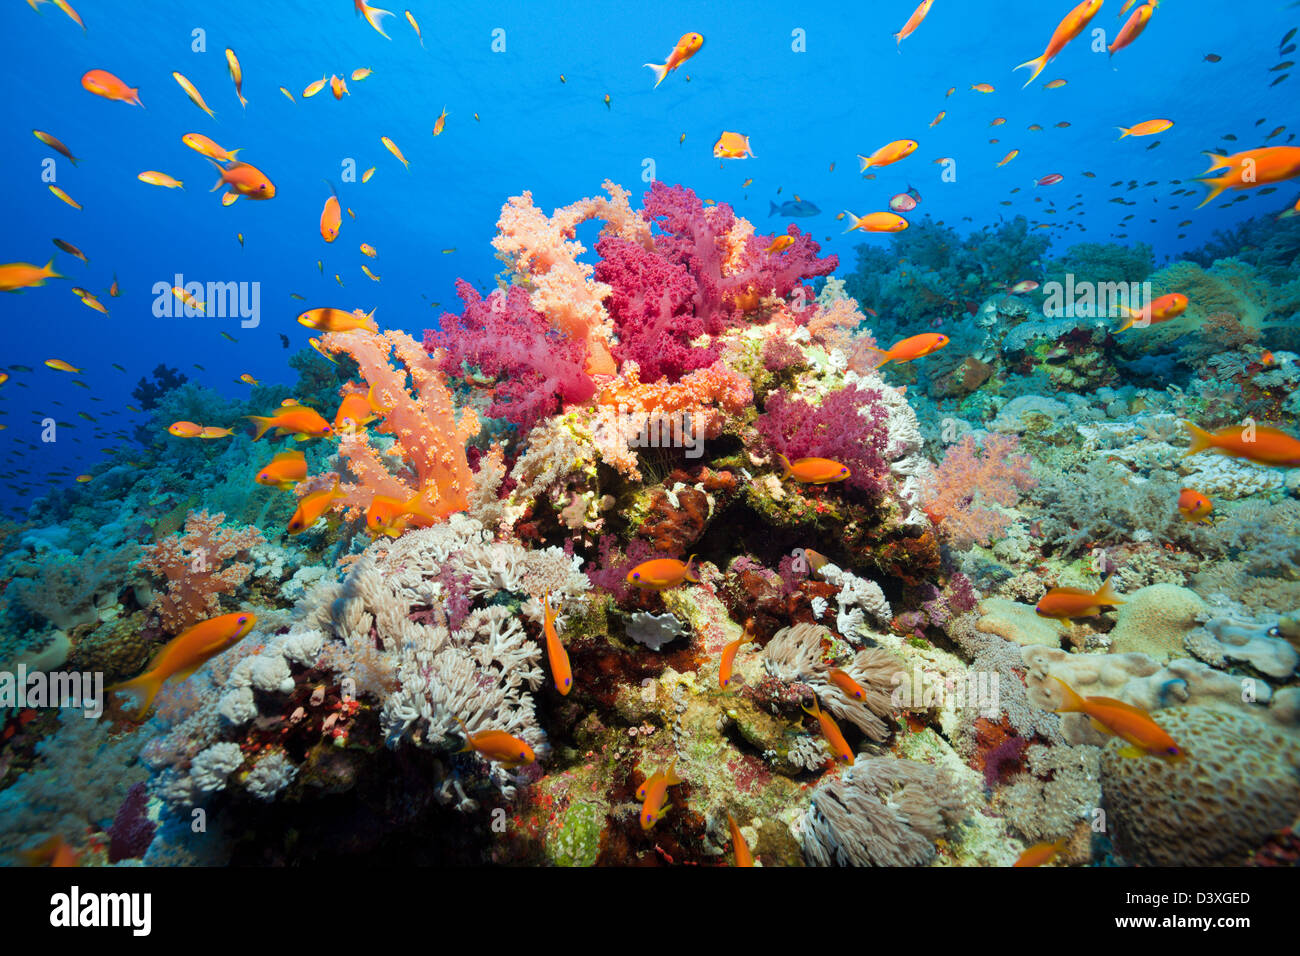 Soft Coral Reef, Dendronephthya sp., Elphinstone Reef, Red Sea, Egypt Banque D'Images